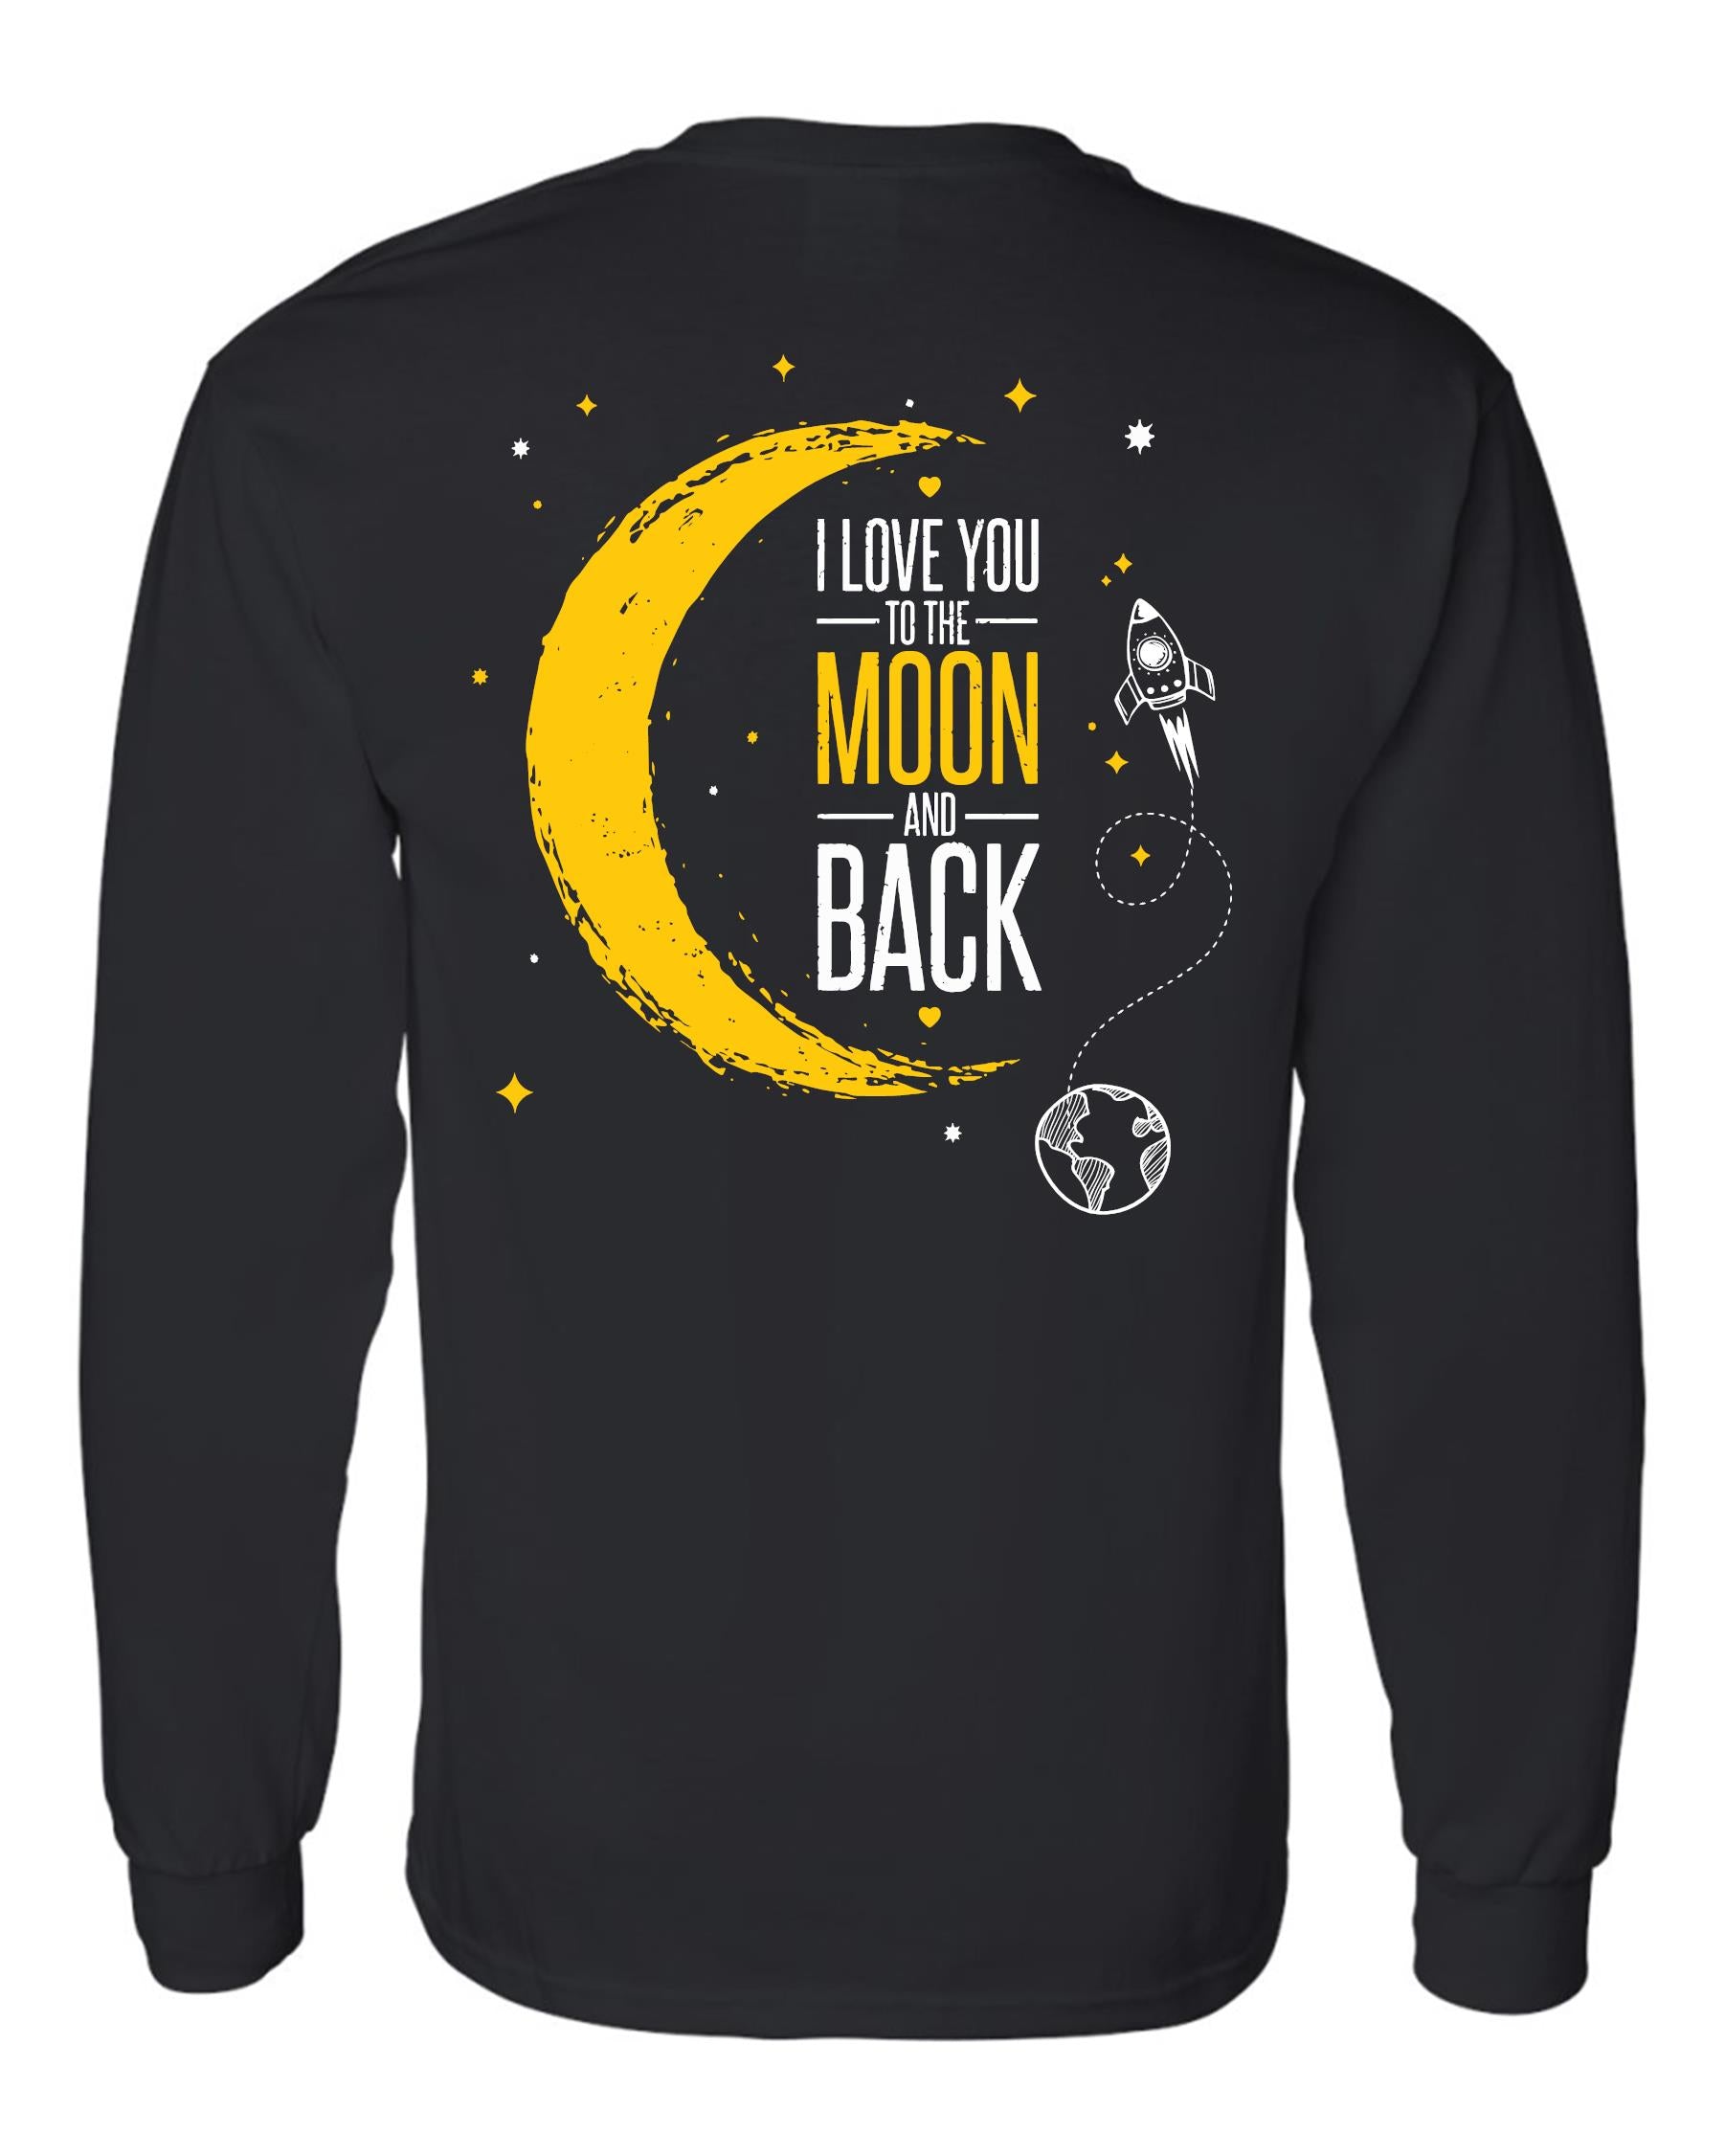 Love You To The Moon Long Sleeve Black T-shirt